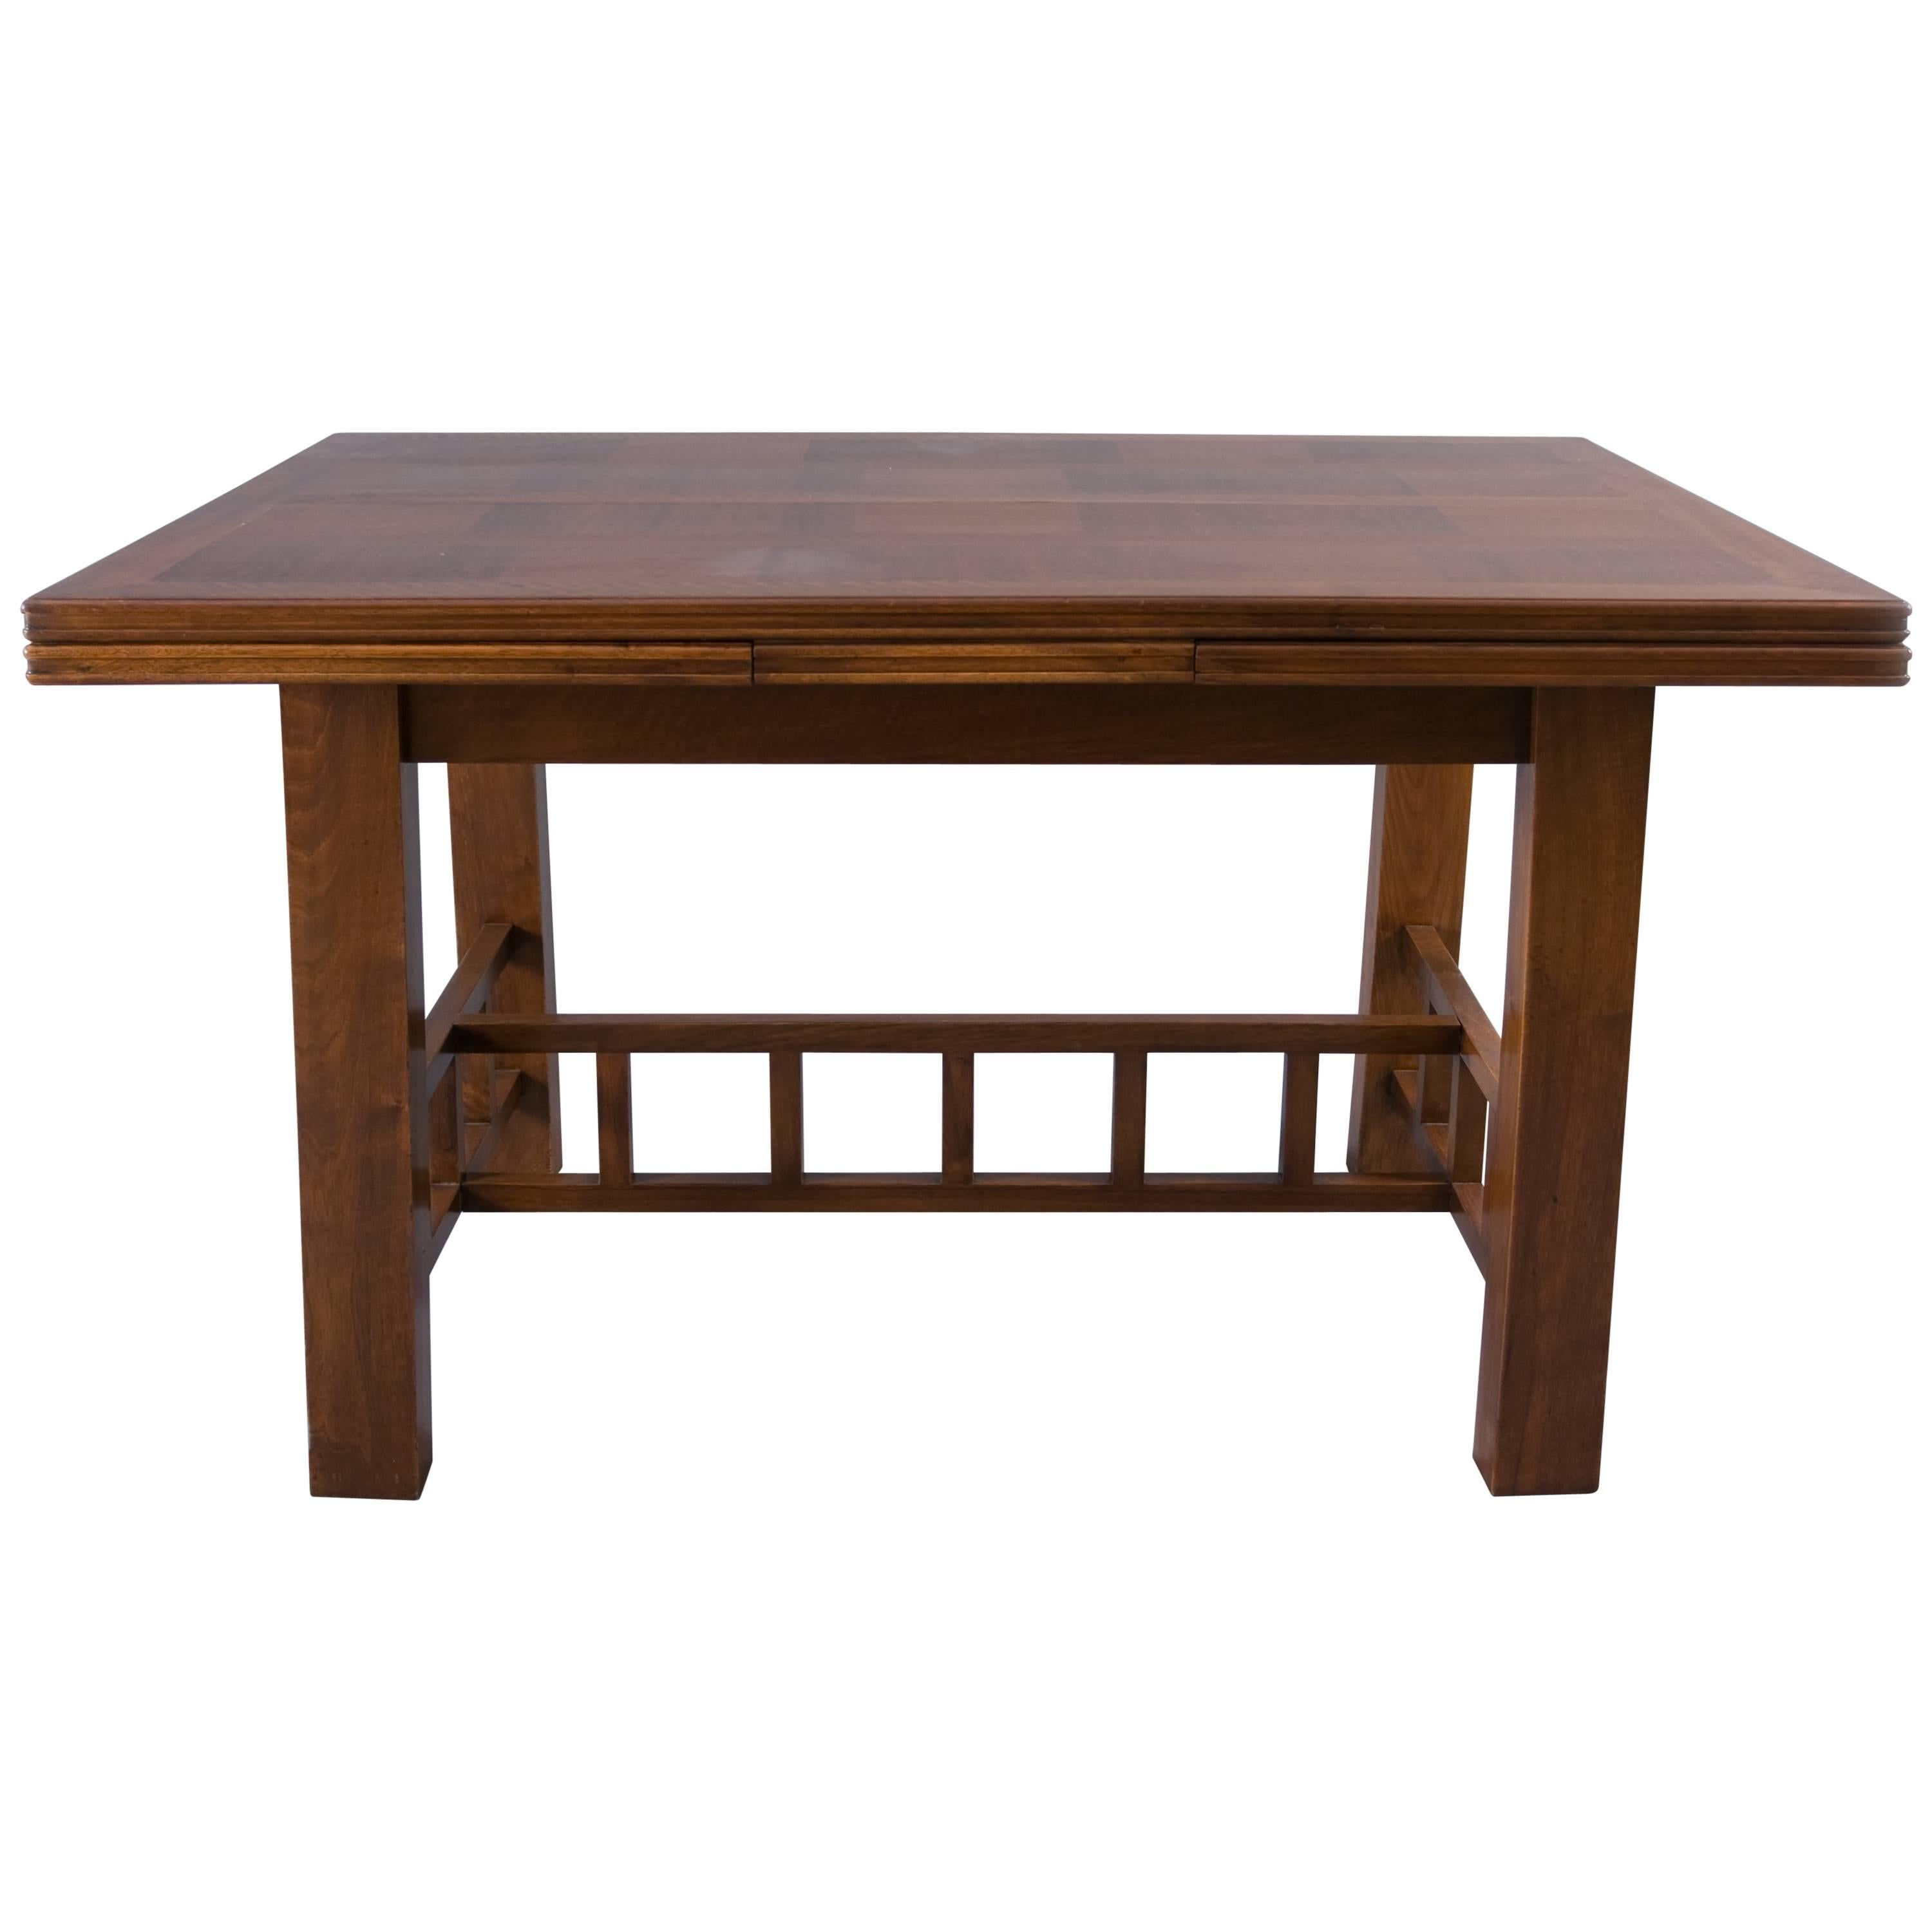 Dining Table with Extension Leaves Attributed to Francis Jourdain